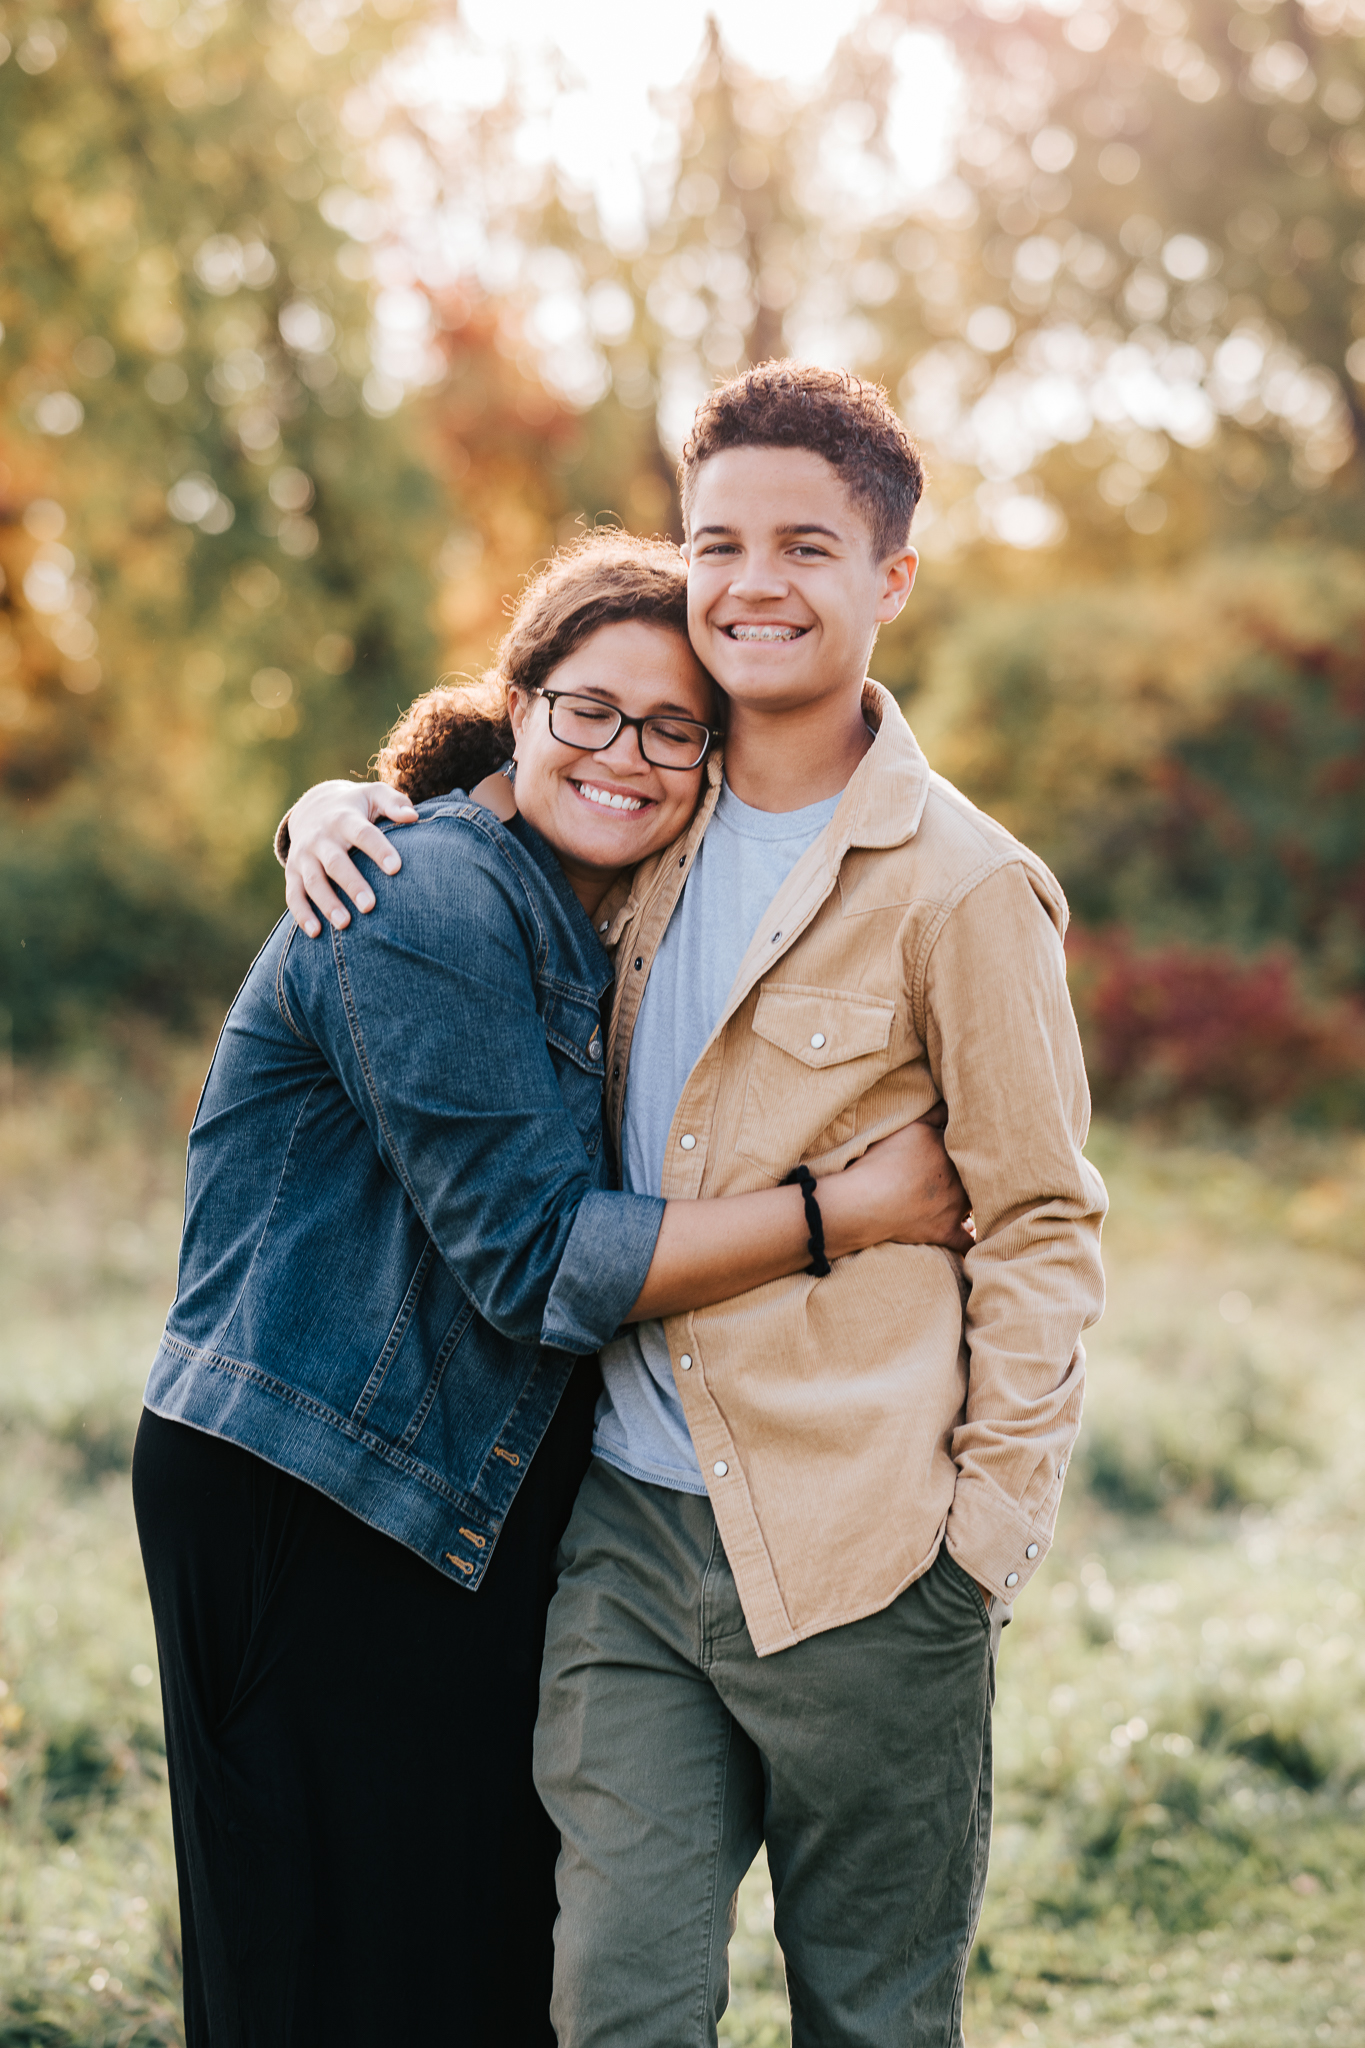 Mom and son | Boston Family Photographer and Videographer